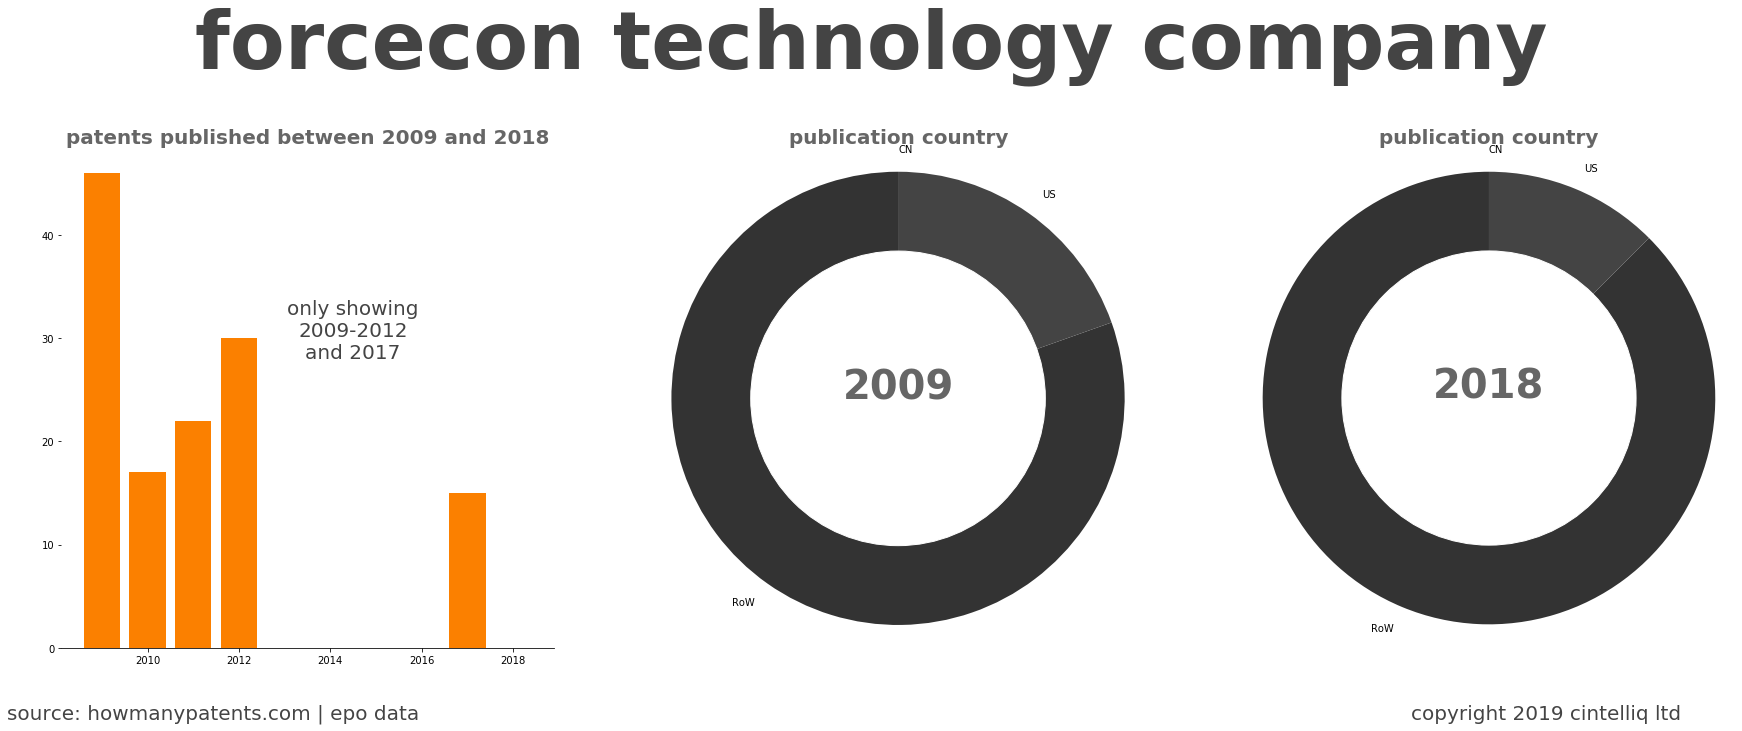 summary of patents for Forcecon Technology Company